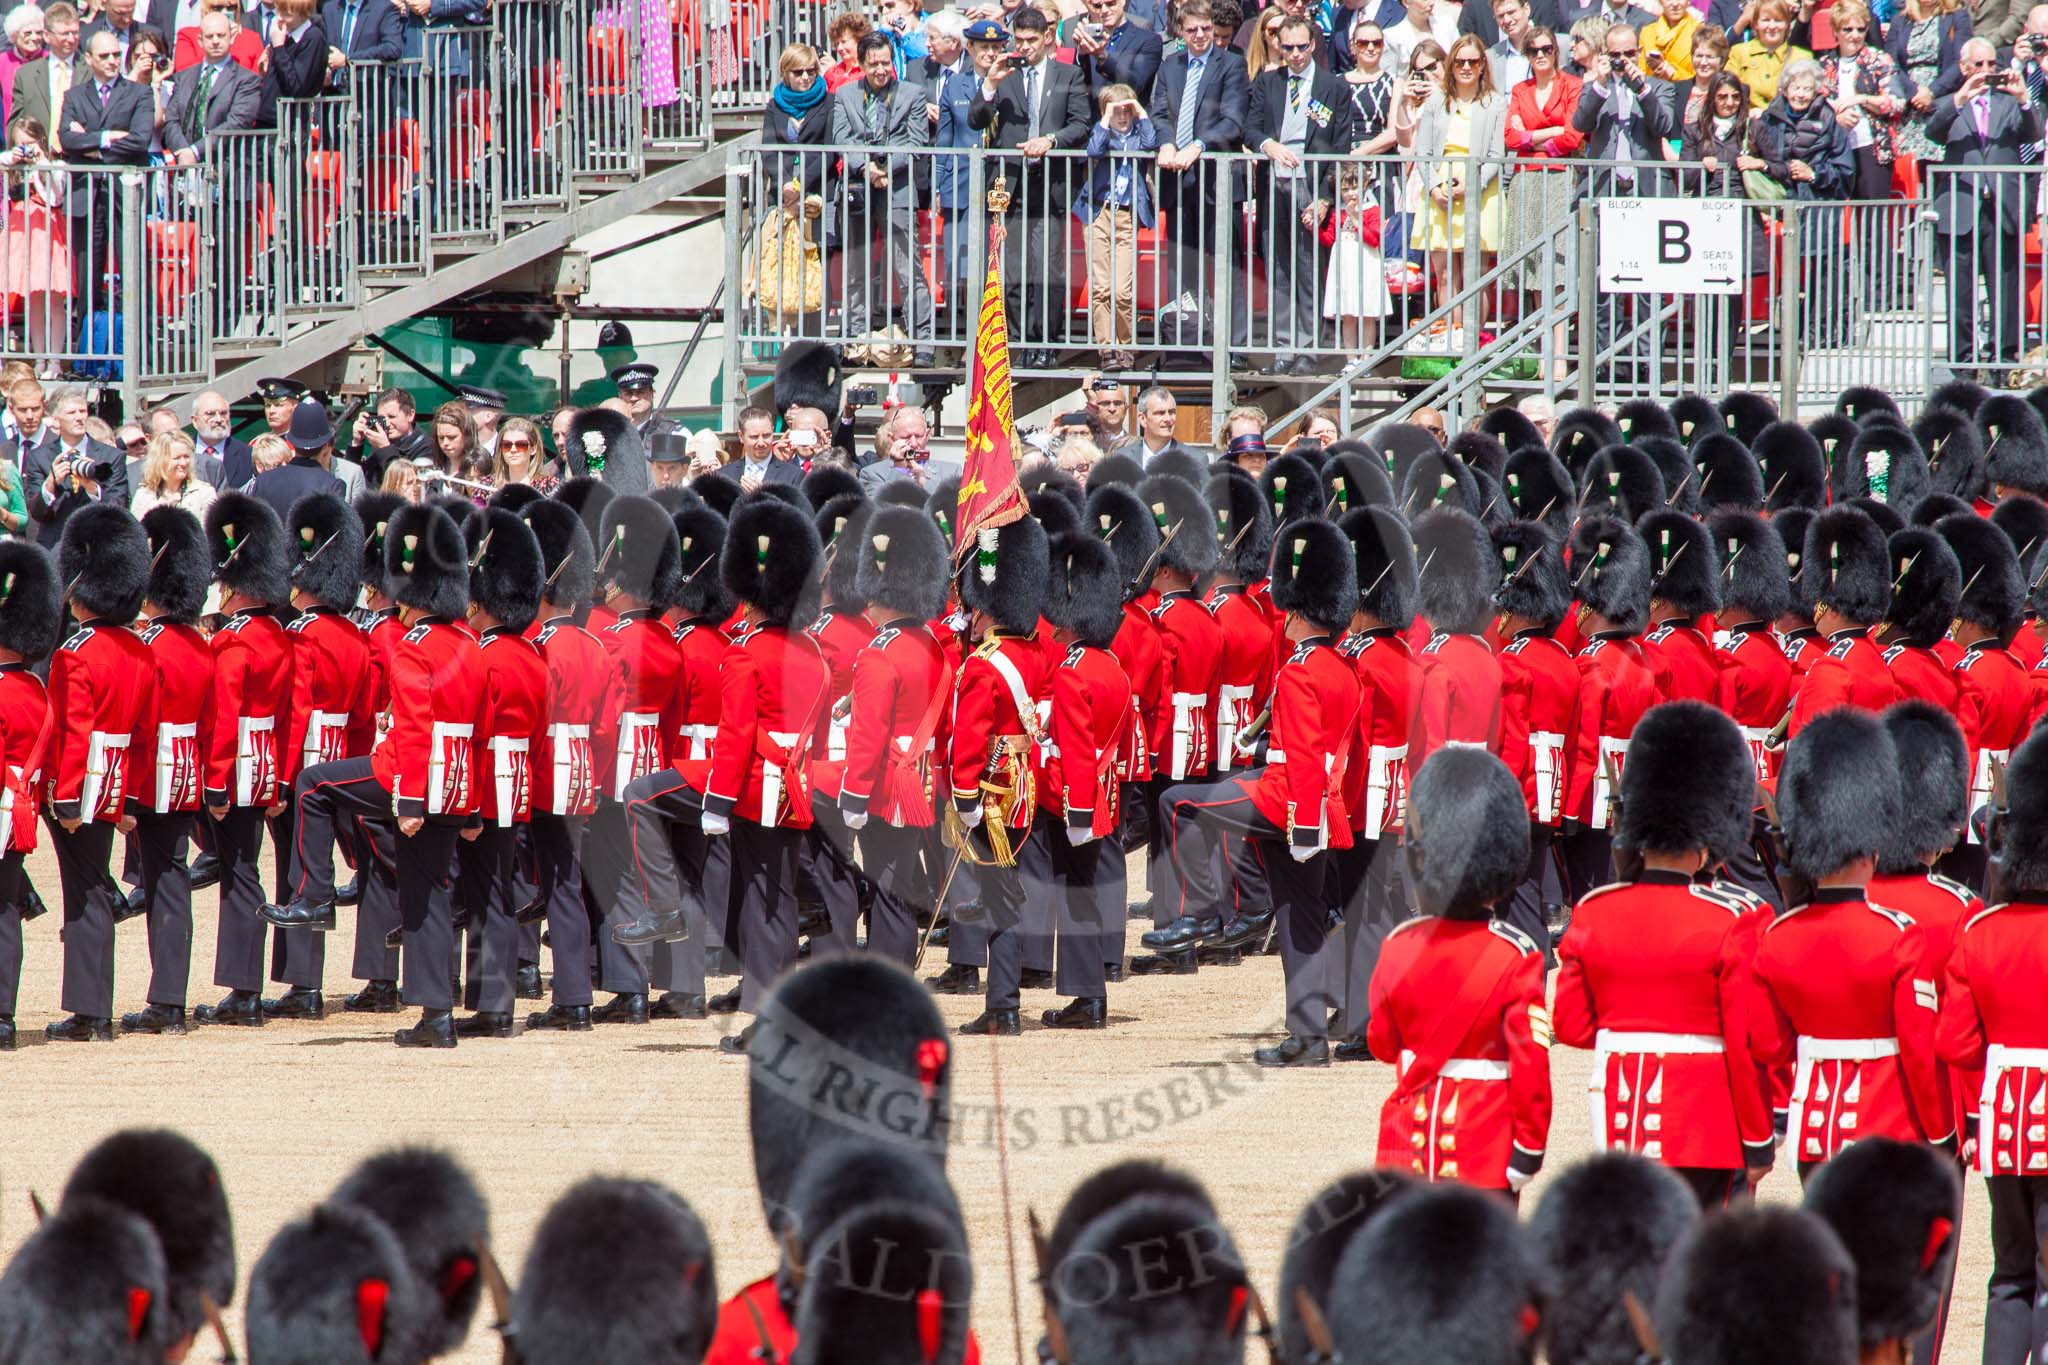 Trooping the Colour 2013: No. 1 Guard, the Escort to the Colour),1st Battalion Welsh Guards, with the Ensign carrting the Colour behind the lines of guardsmen, during the March Past. Image #558, 15 June 2013 11:39 Horse Guards Parade, London, UK